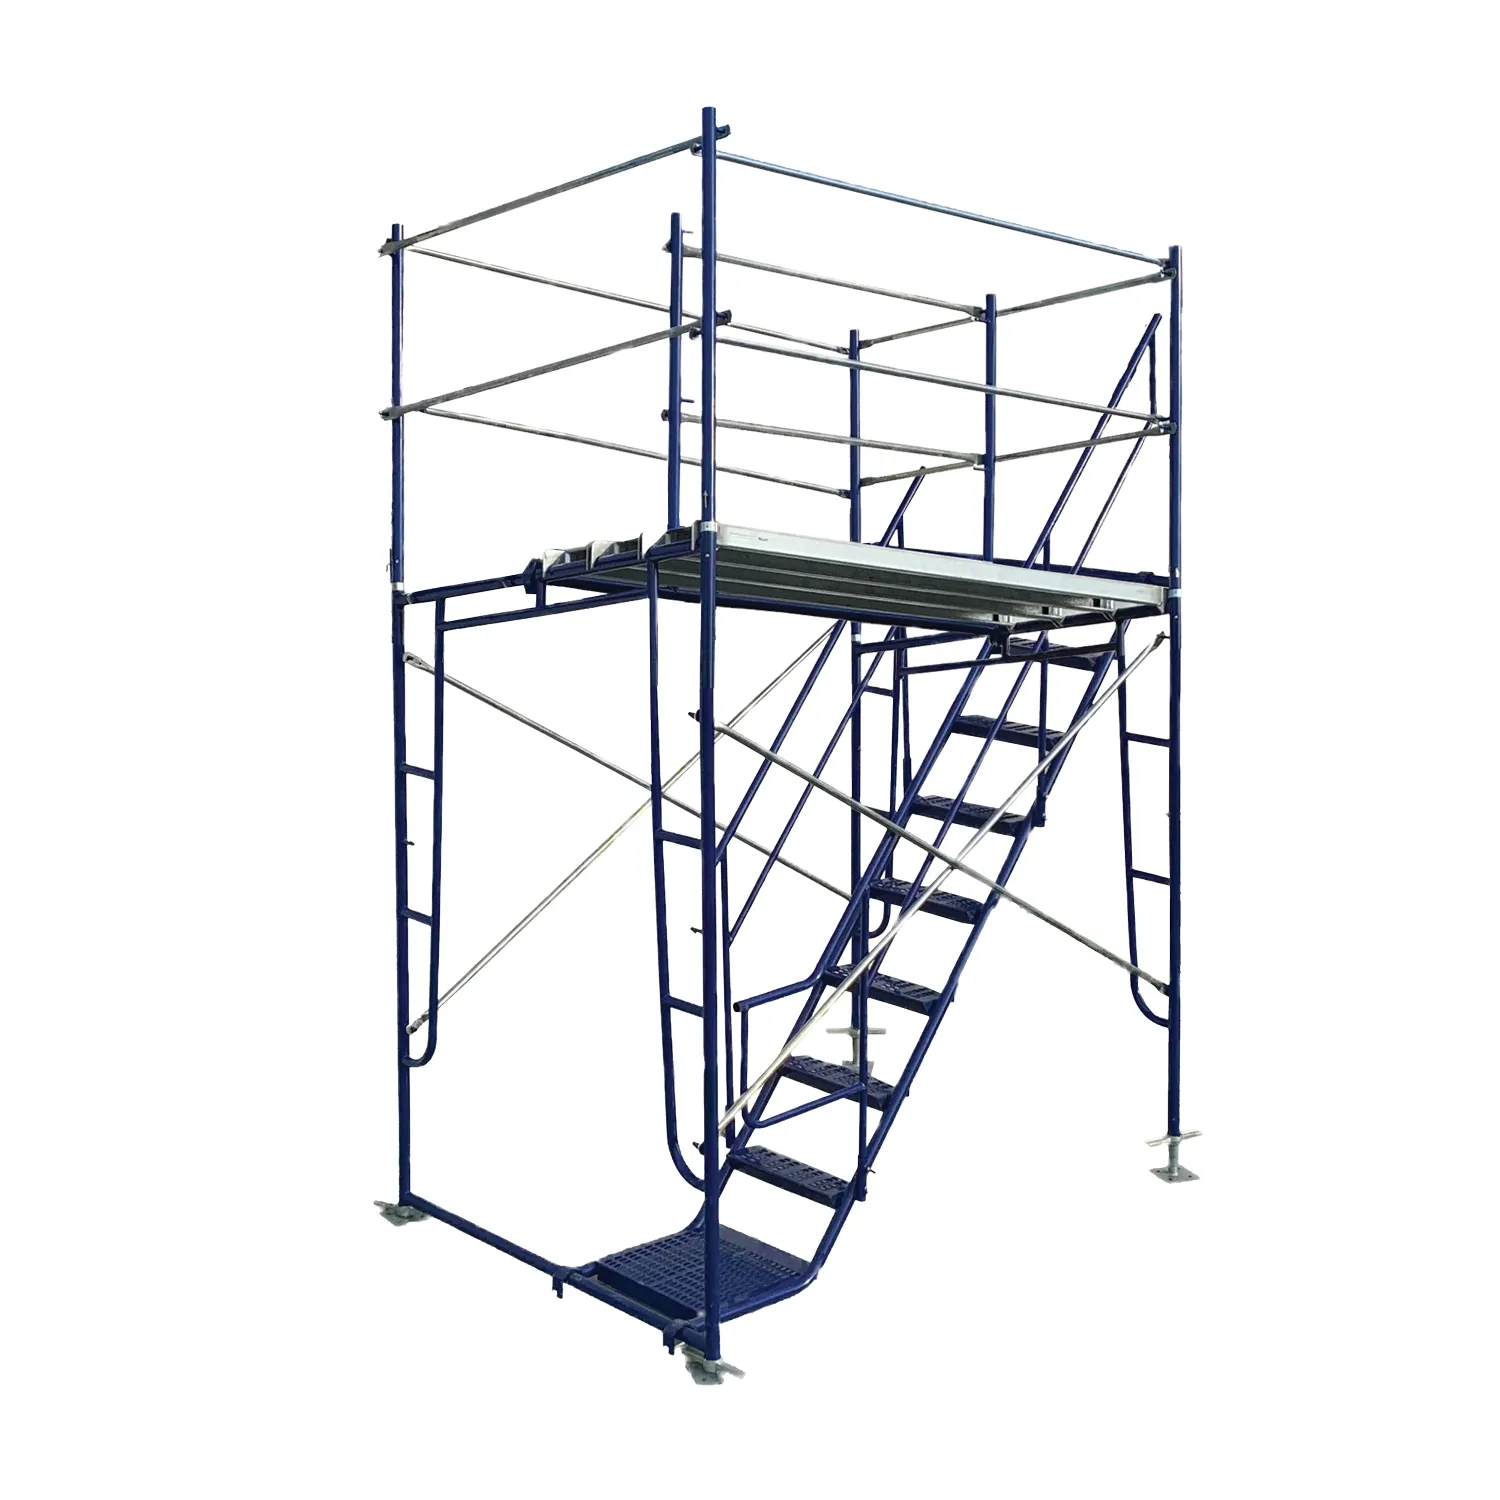 7′ Stationary Scaffold Stair Tower Kit team809